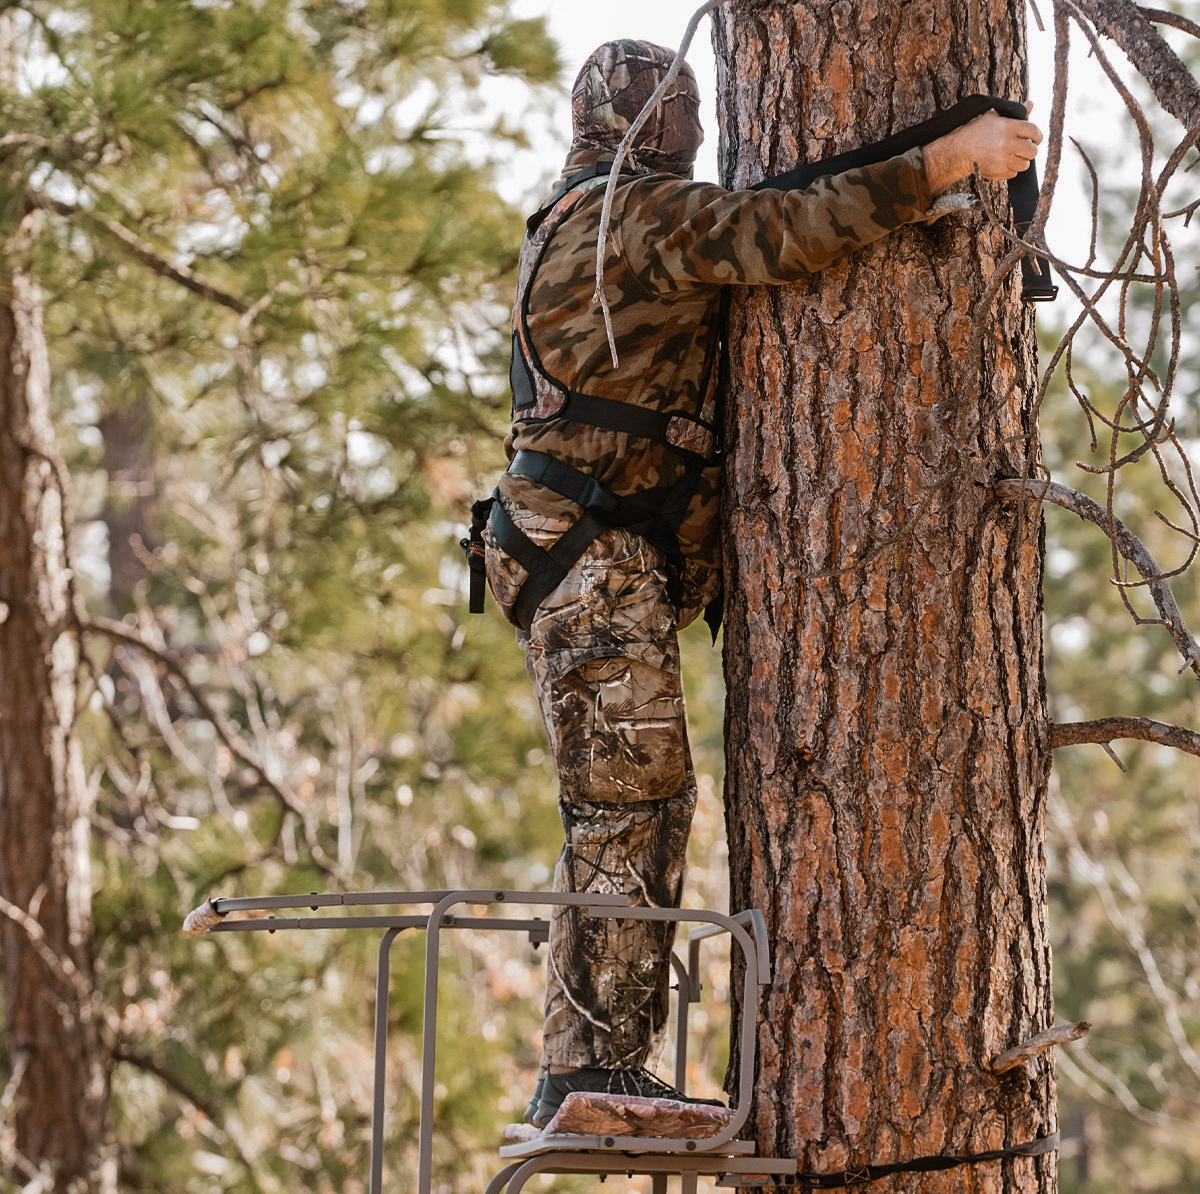 Wearing a safety harness will prevent you from falling and having a hunting accident